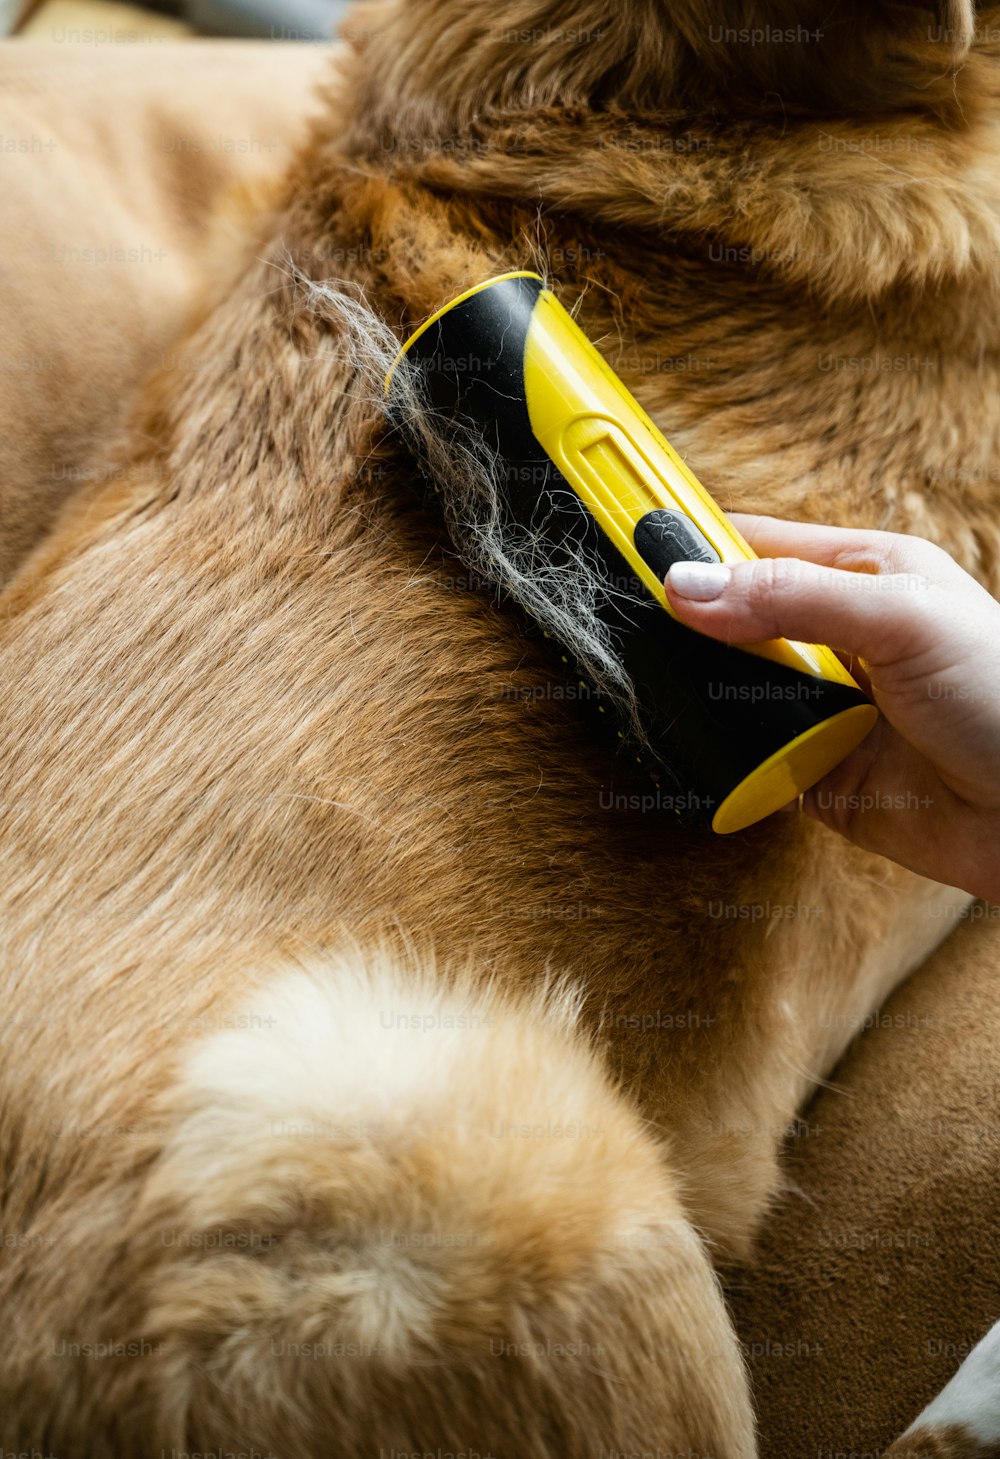 a close up of a person brushing a dog's hair